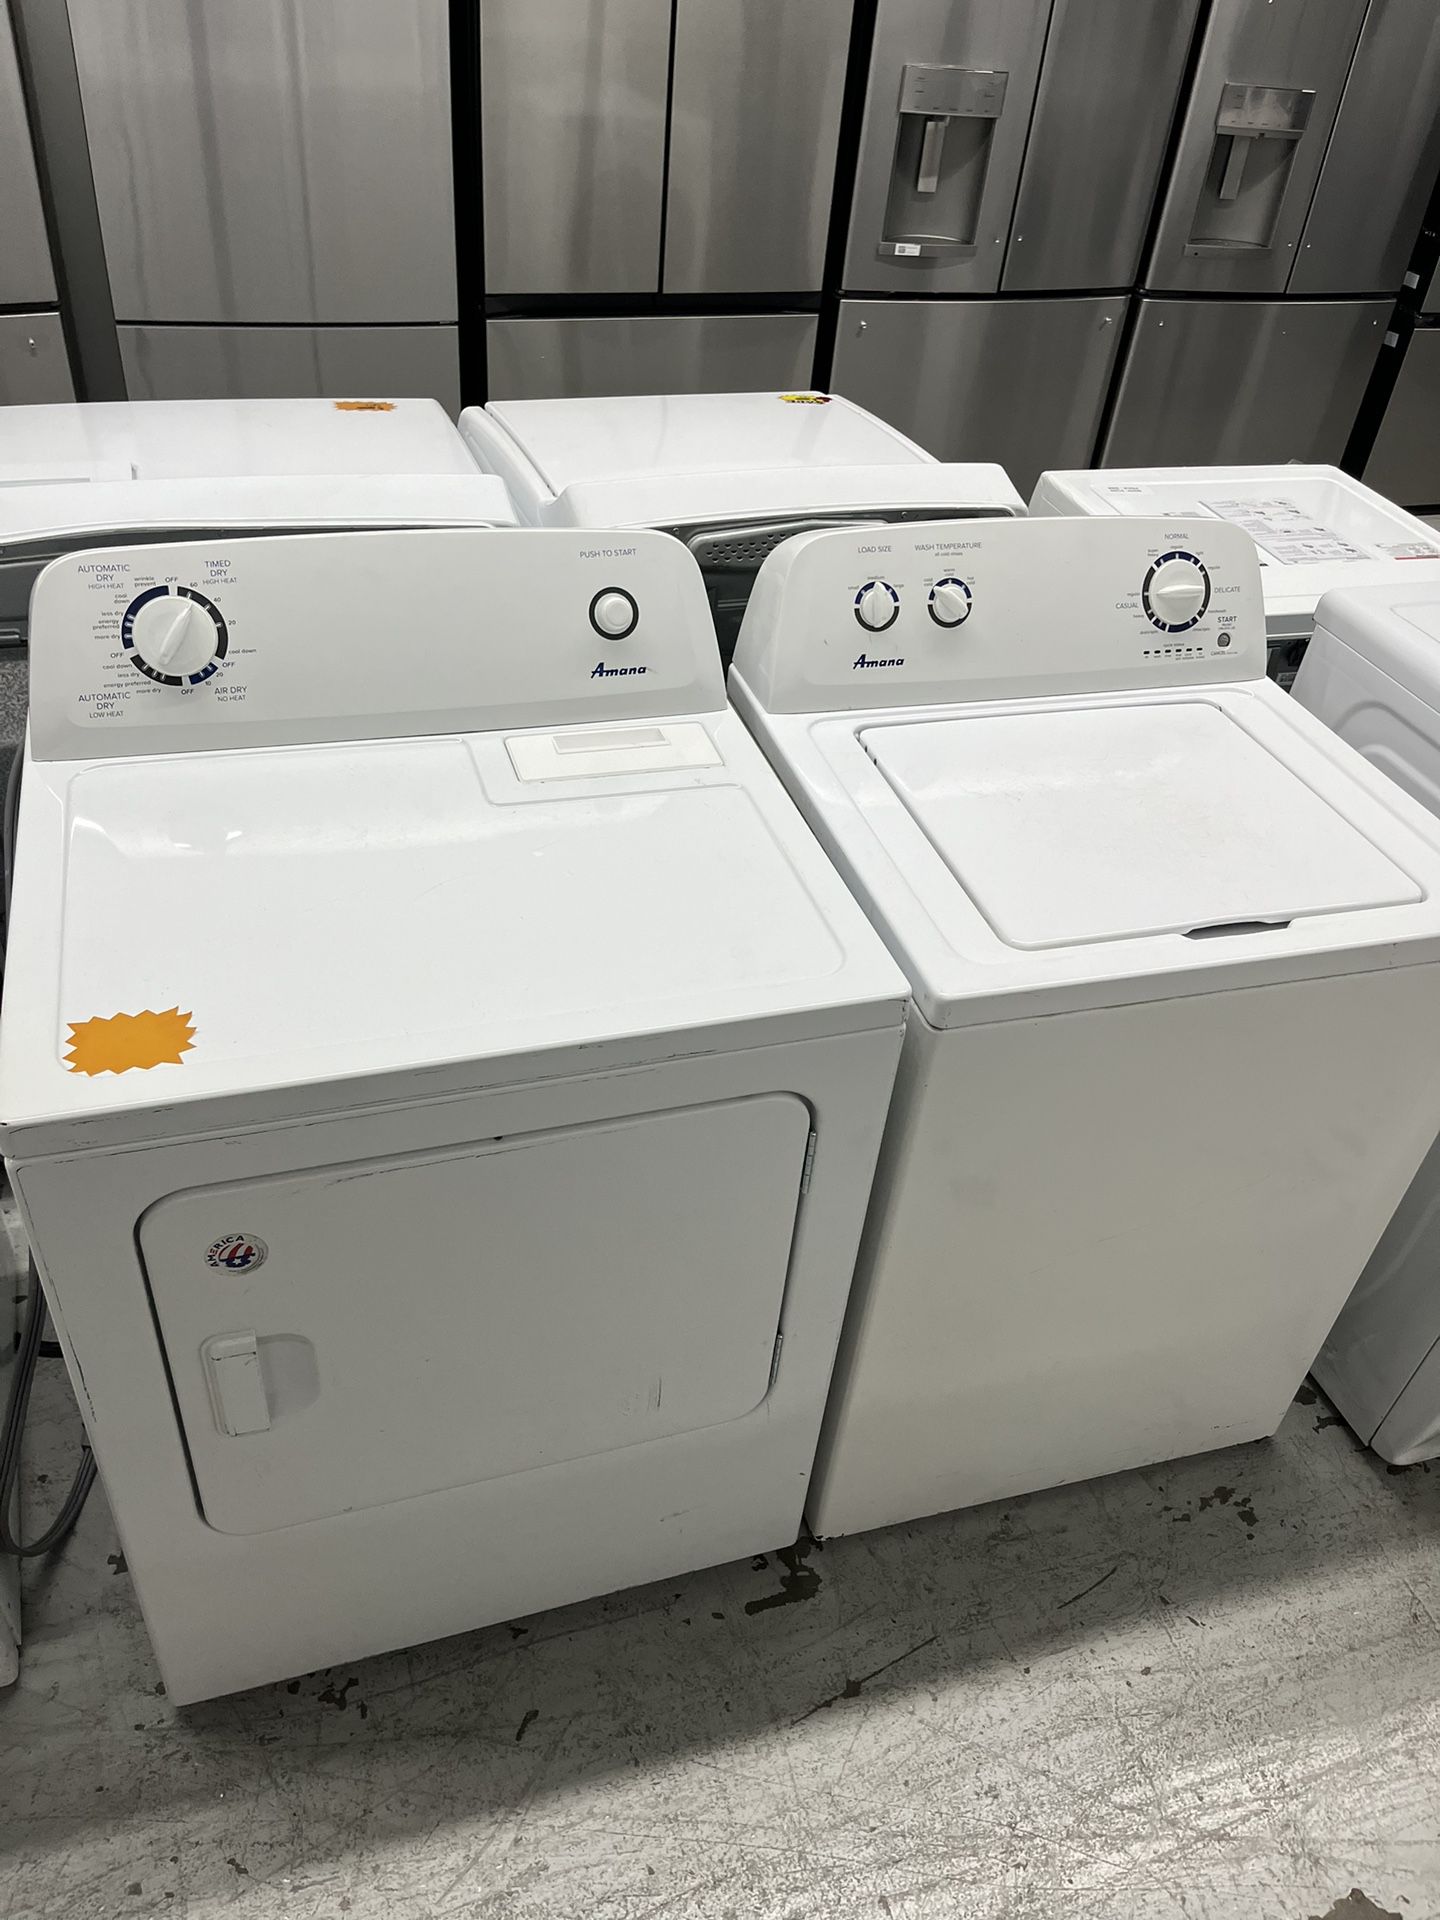 tested to work 100% reconditioned laundry sets matching huge sale‼️